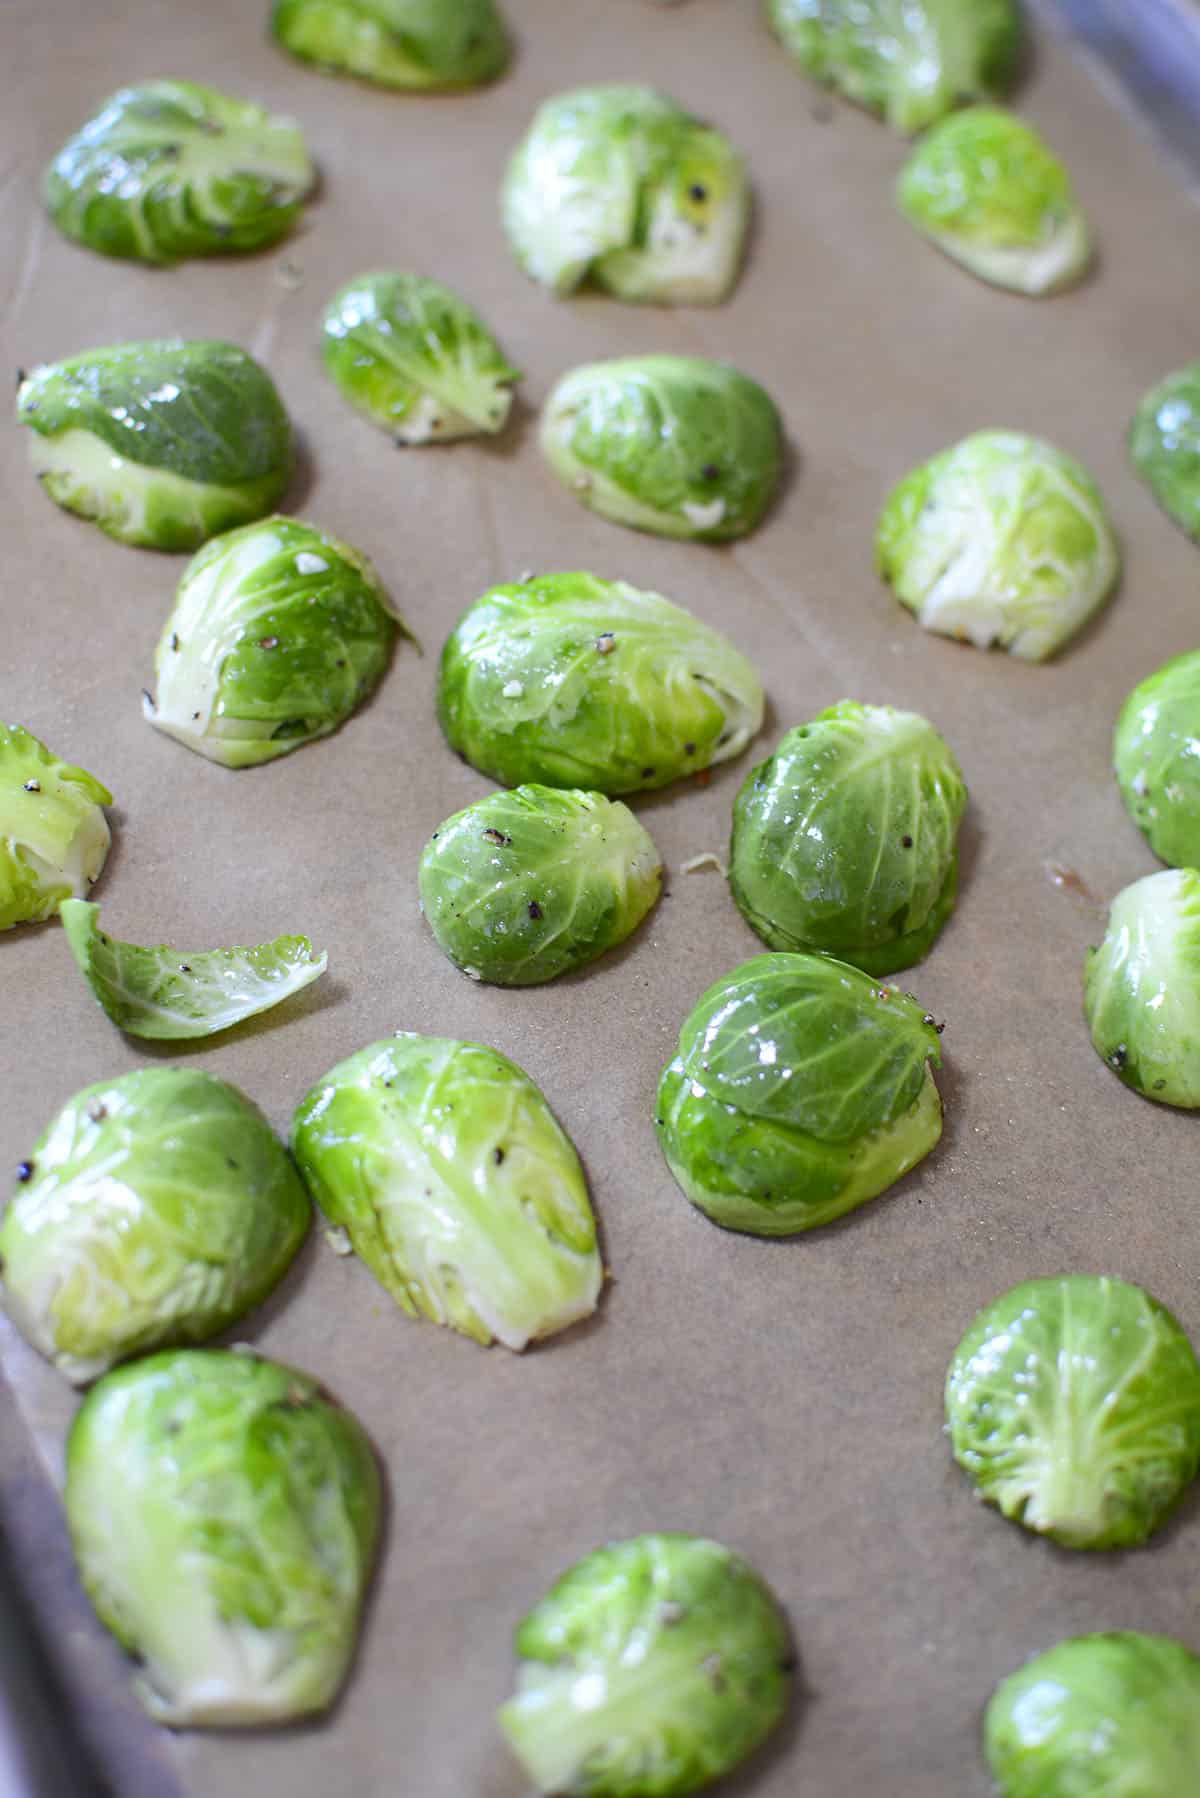 Brussel sprouts, cut side down on a baking sheet.